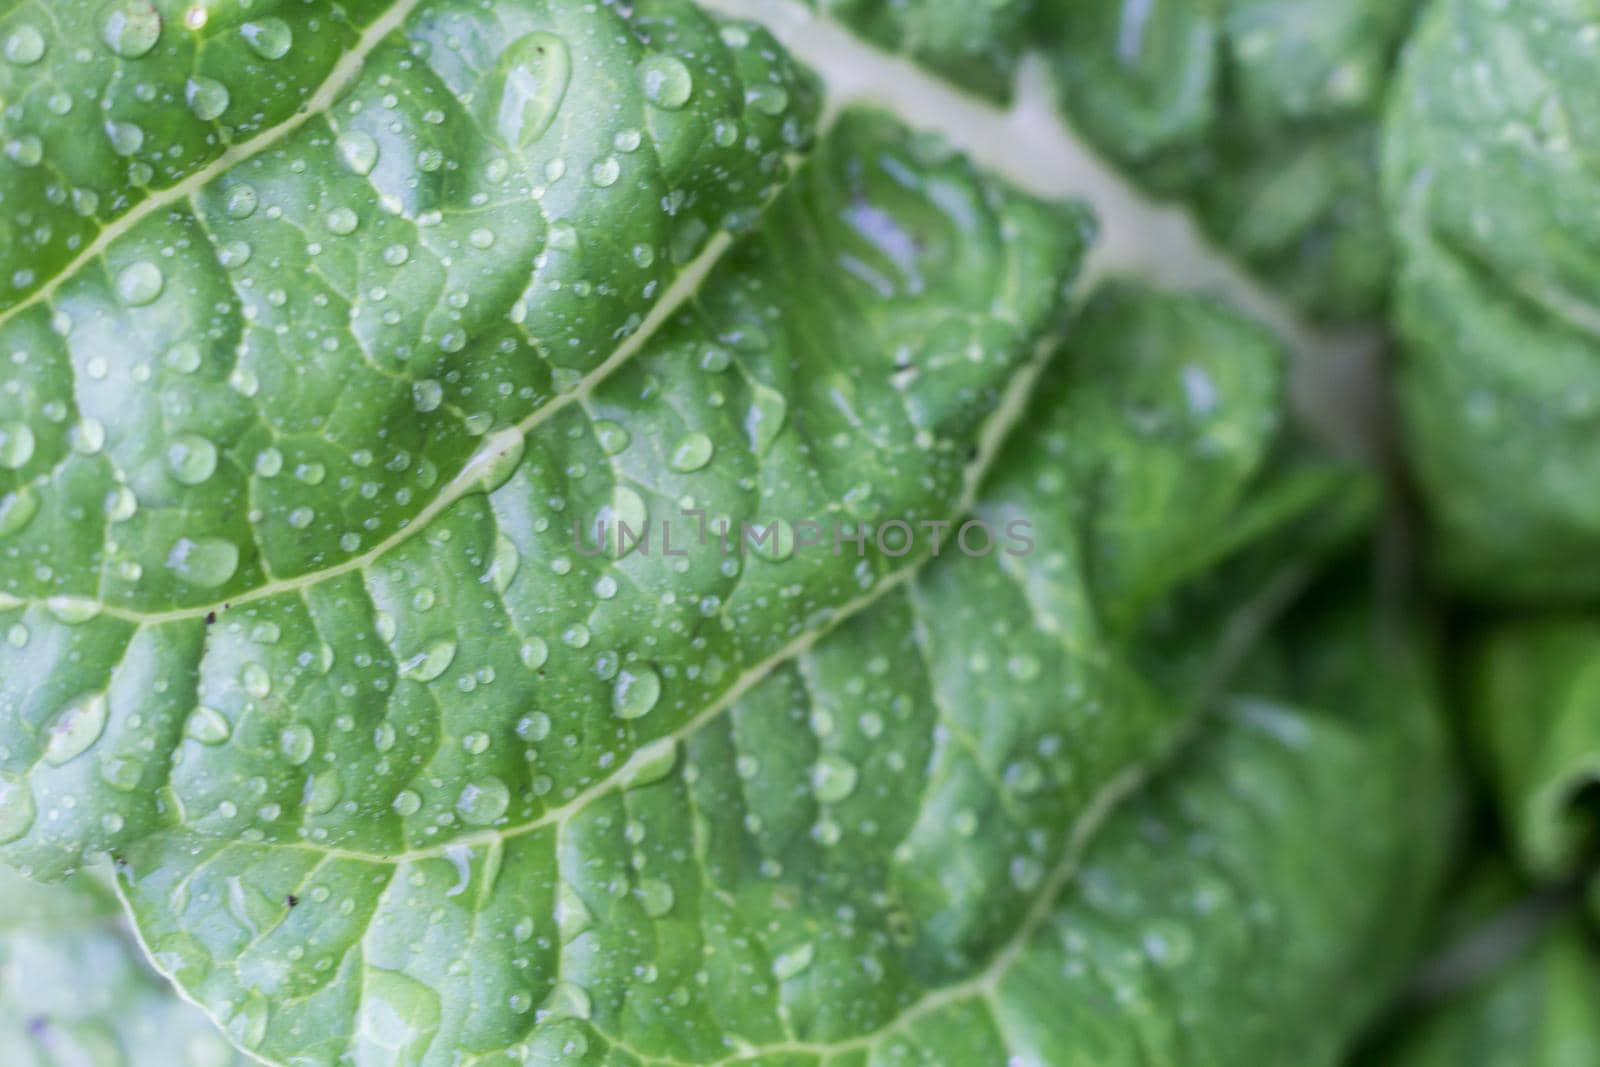 chard leaves wet with raindrops in the organic garden in the spring by GabrielaBertolini